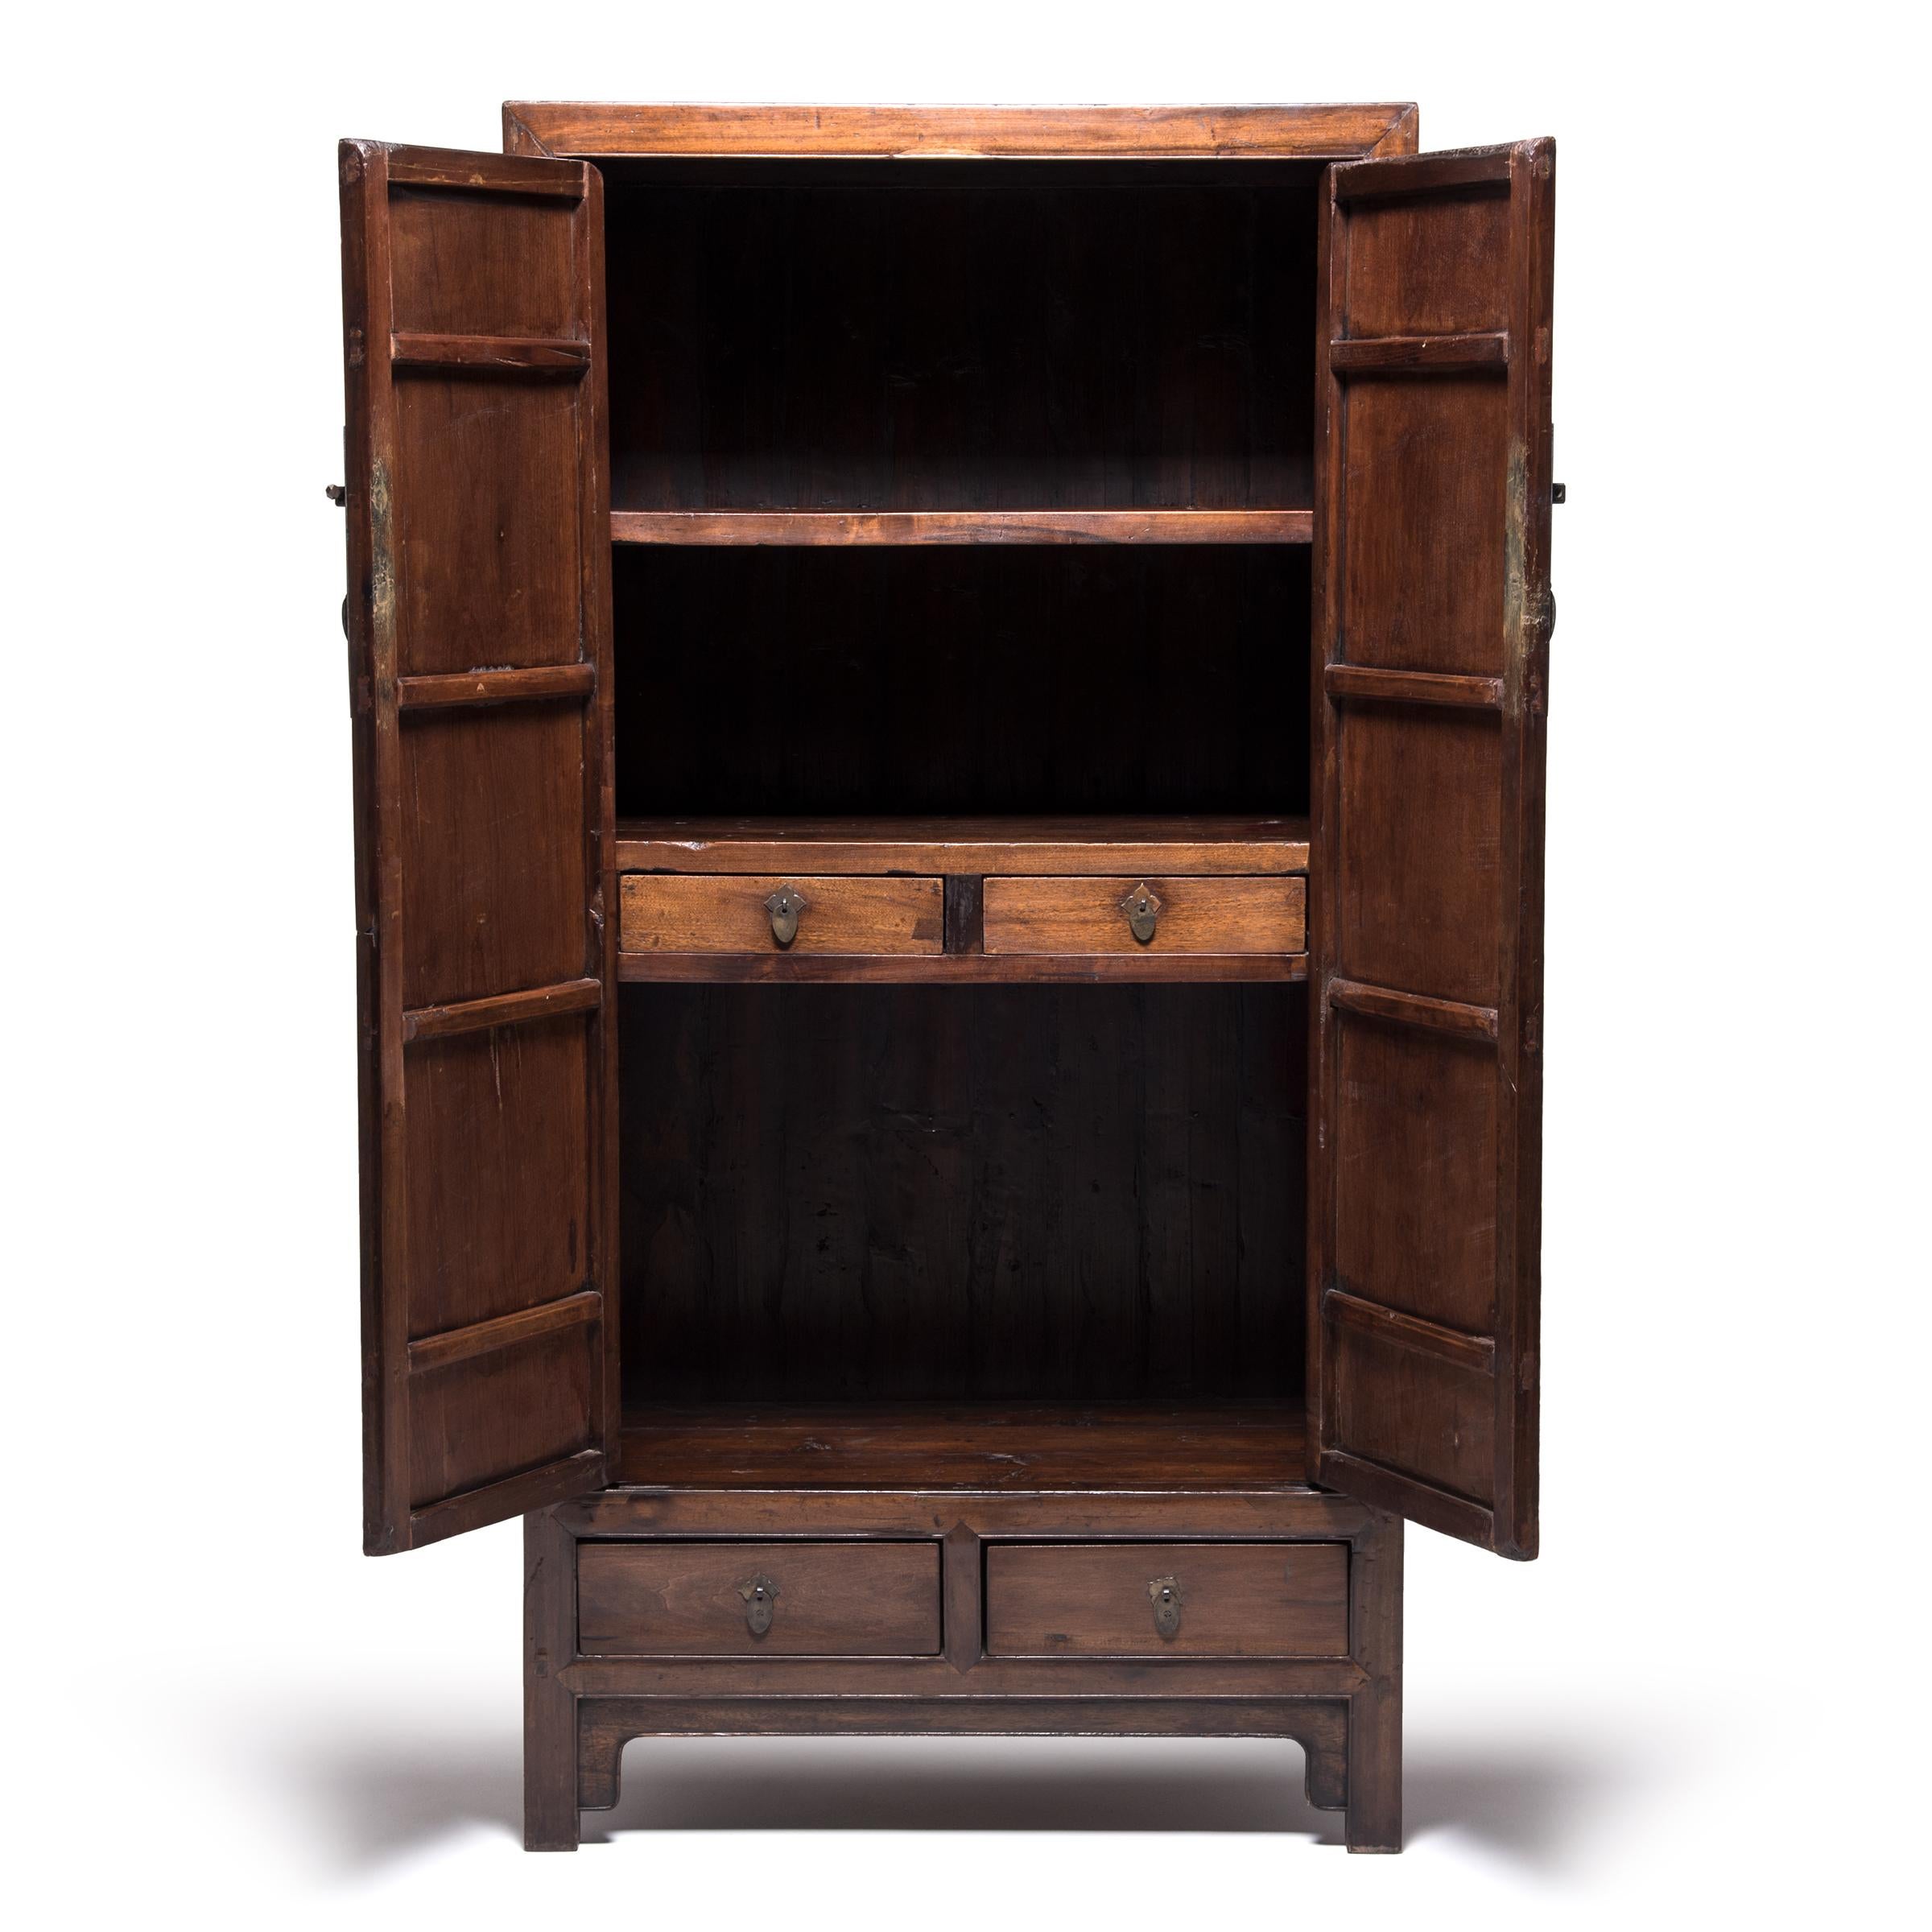 Although elaborate decoration became increasingly common in Qing-dynasty furniture design, the Ming-dynasty’s legacy of clean, elegant lines remained a powerful influence as seen in this statuesque scholar’s cabinet. Made of warm-colored cedar, the